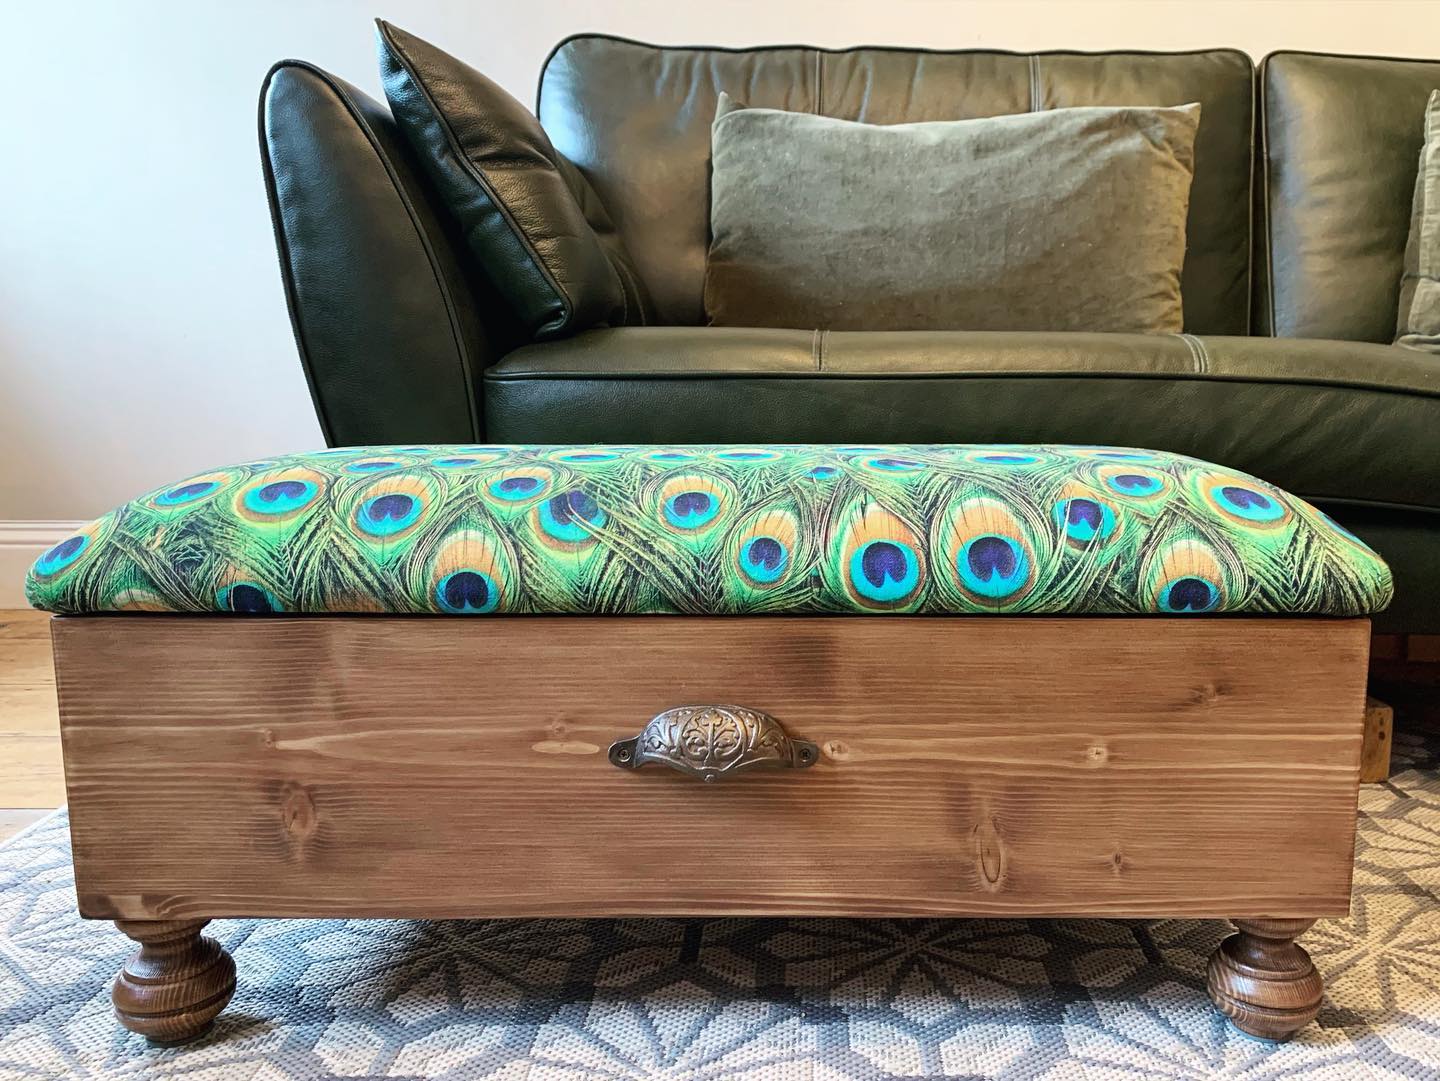 This bespoke blanket box is settling in nicely to its new home 🦚 ...#bespoke #handcrafted #homedecor #home #peacock #beautifulprints #fabric #textiles #interiordesignideas #storagesolutions #livingroomdecor #blanketbox #woodworking #gingerandtweed